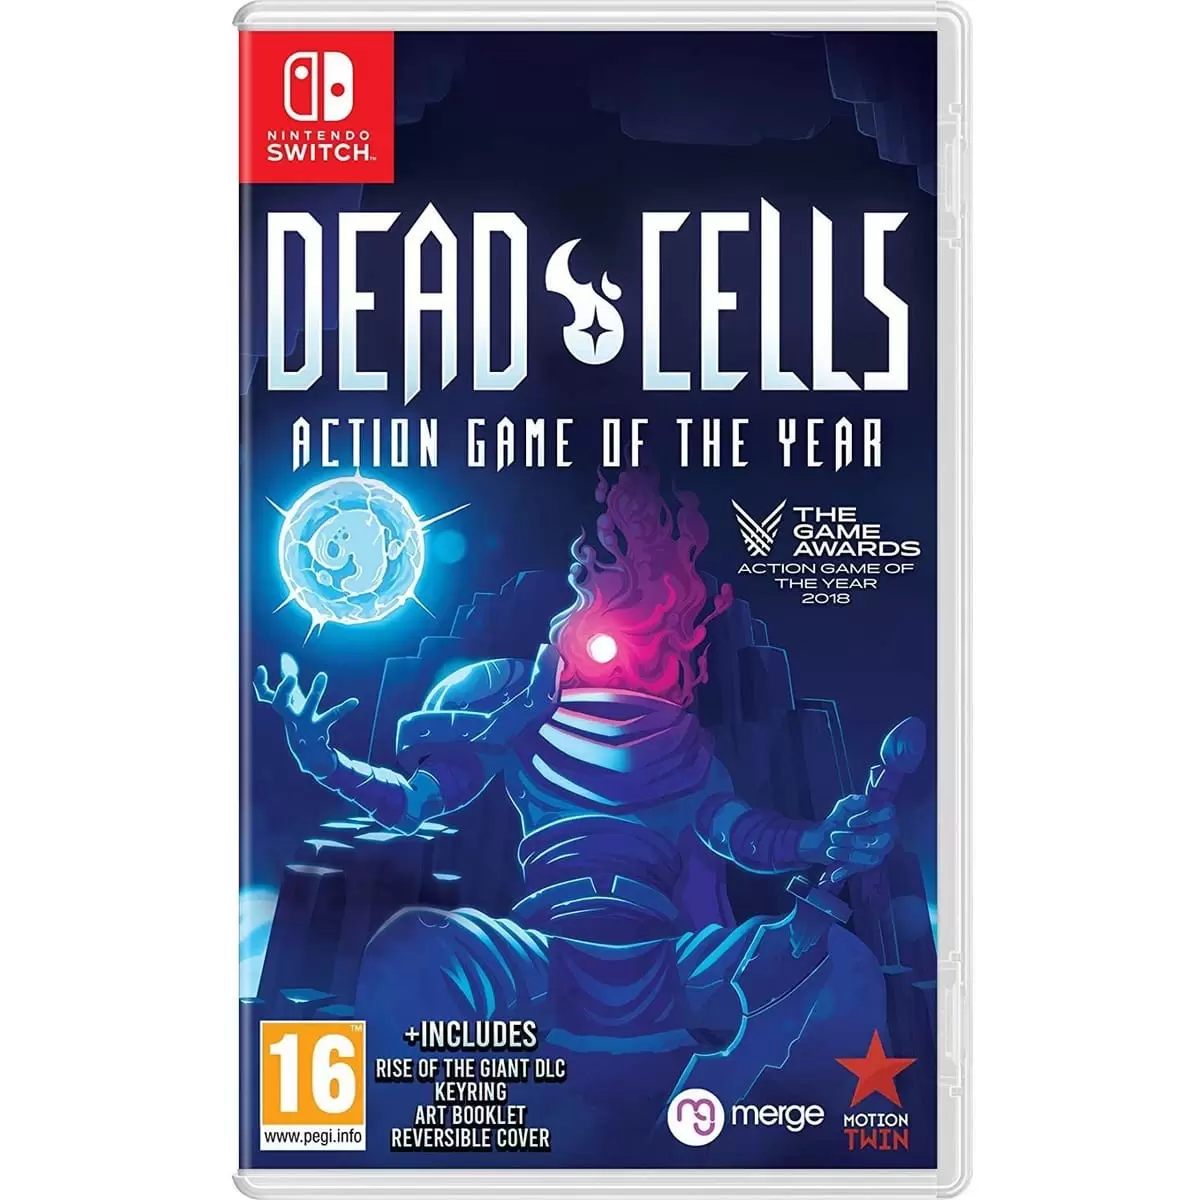 Nintendo Switch Games - Dead Cells - Action Game of the Year